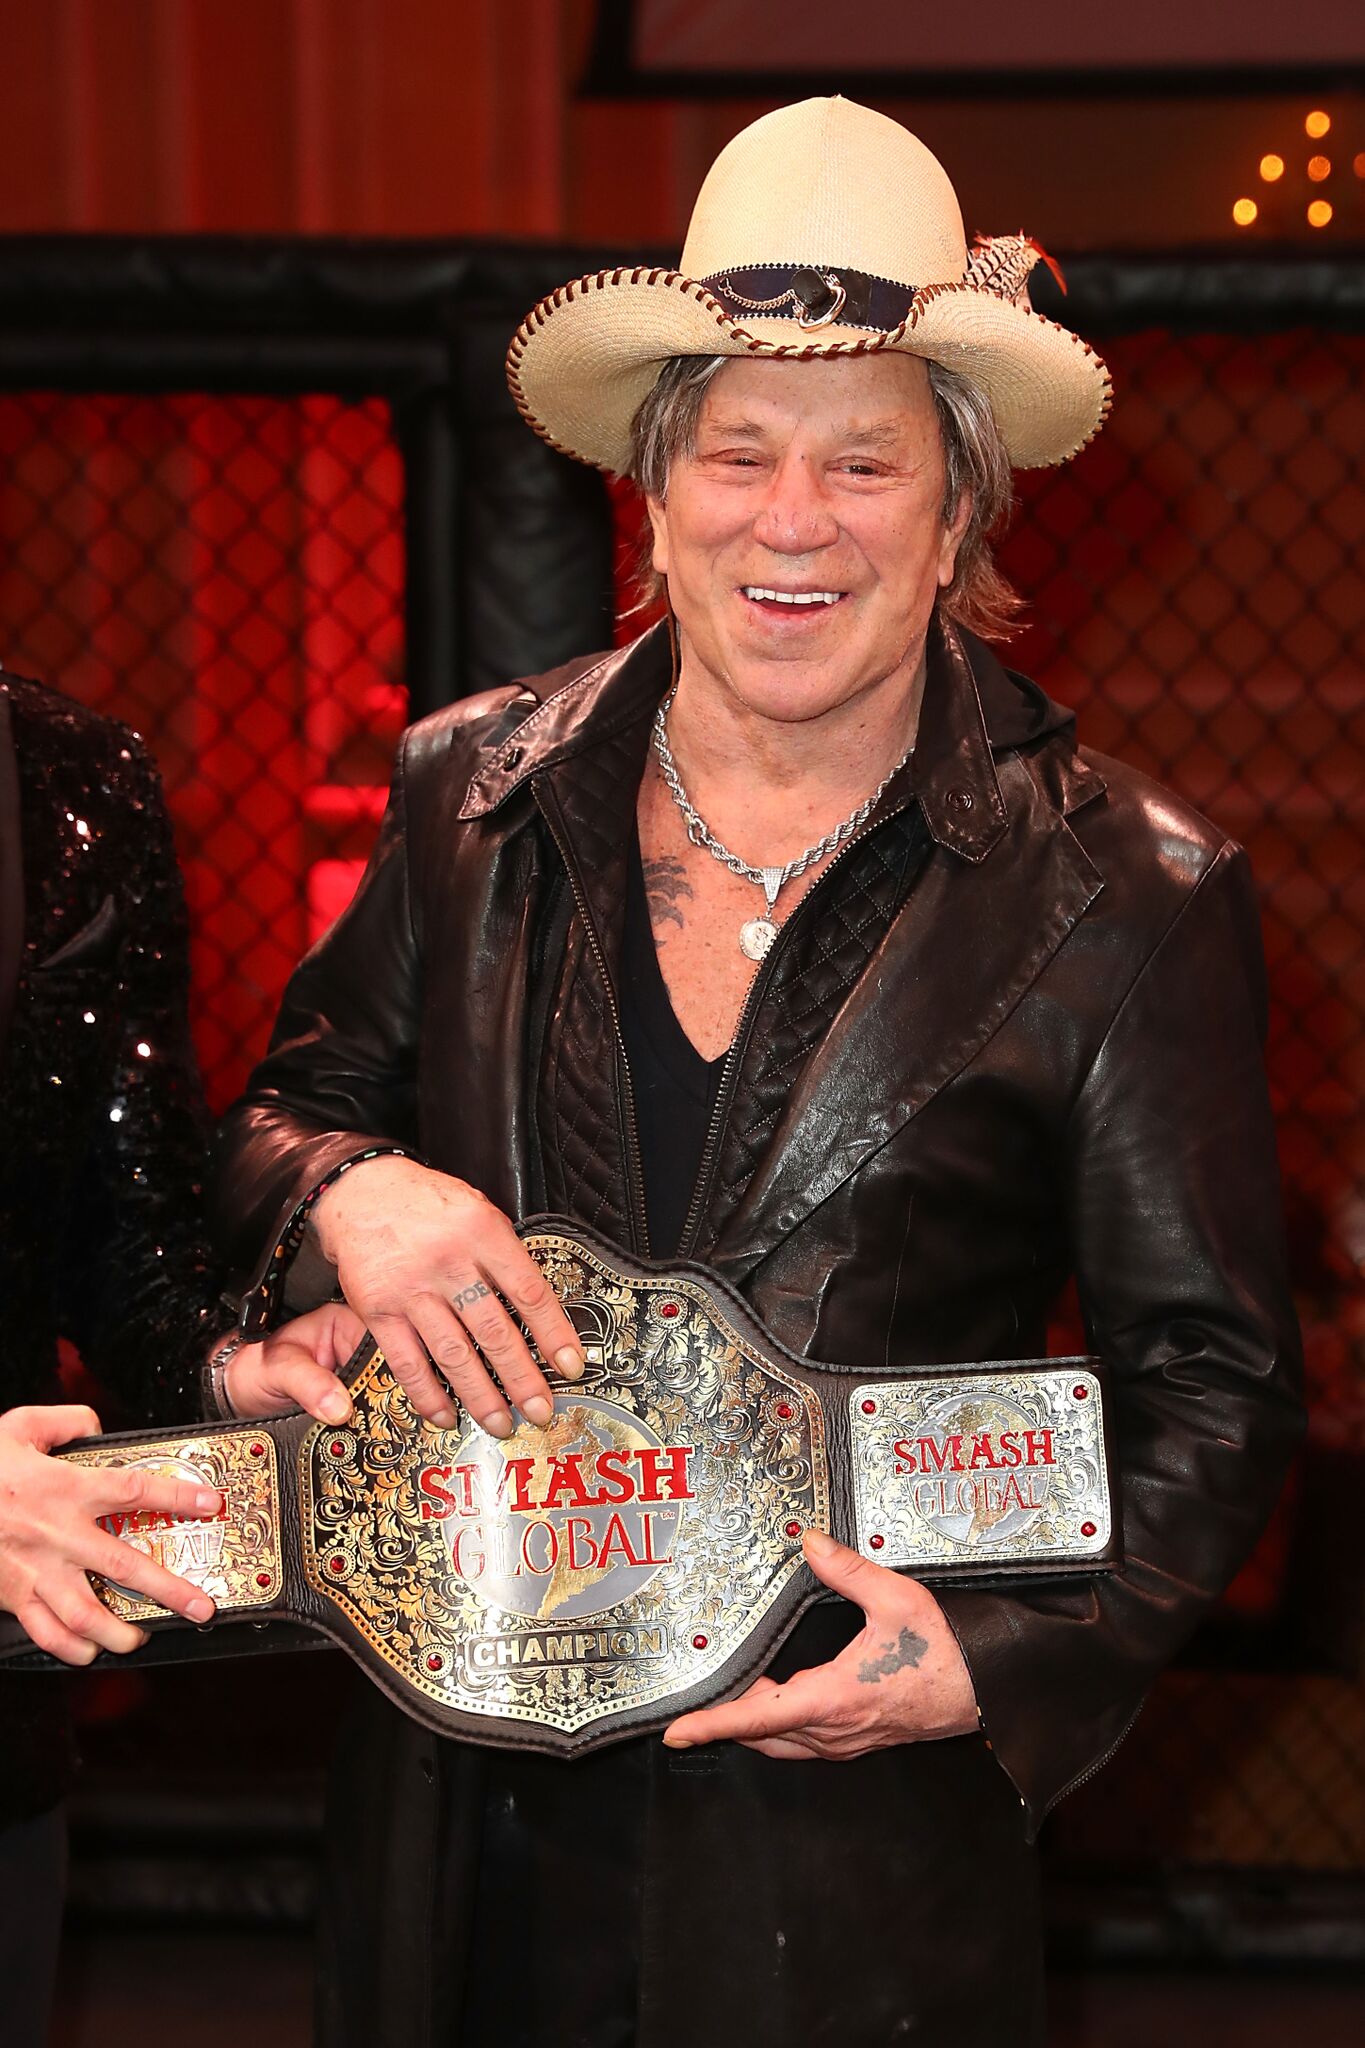 Mickey Rourke poses for a photo at SMASH Global VIII ñ Night Of Champions at Taglyan Cultural Complex | Getty Images / Global Images